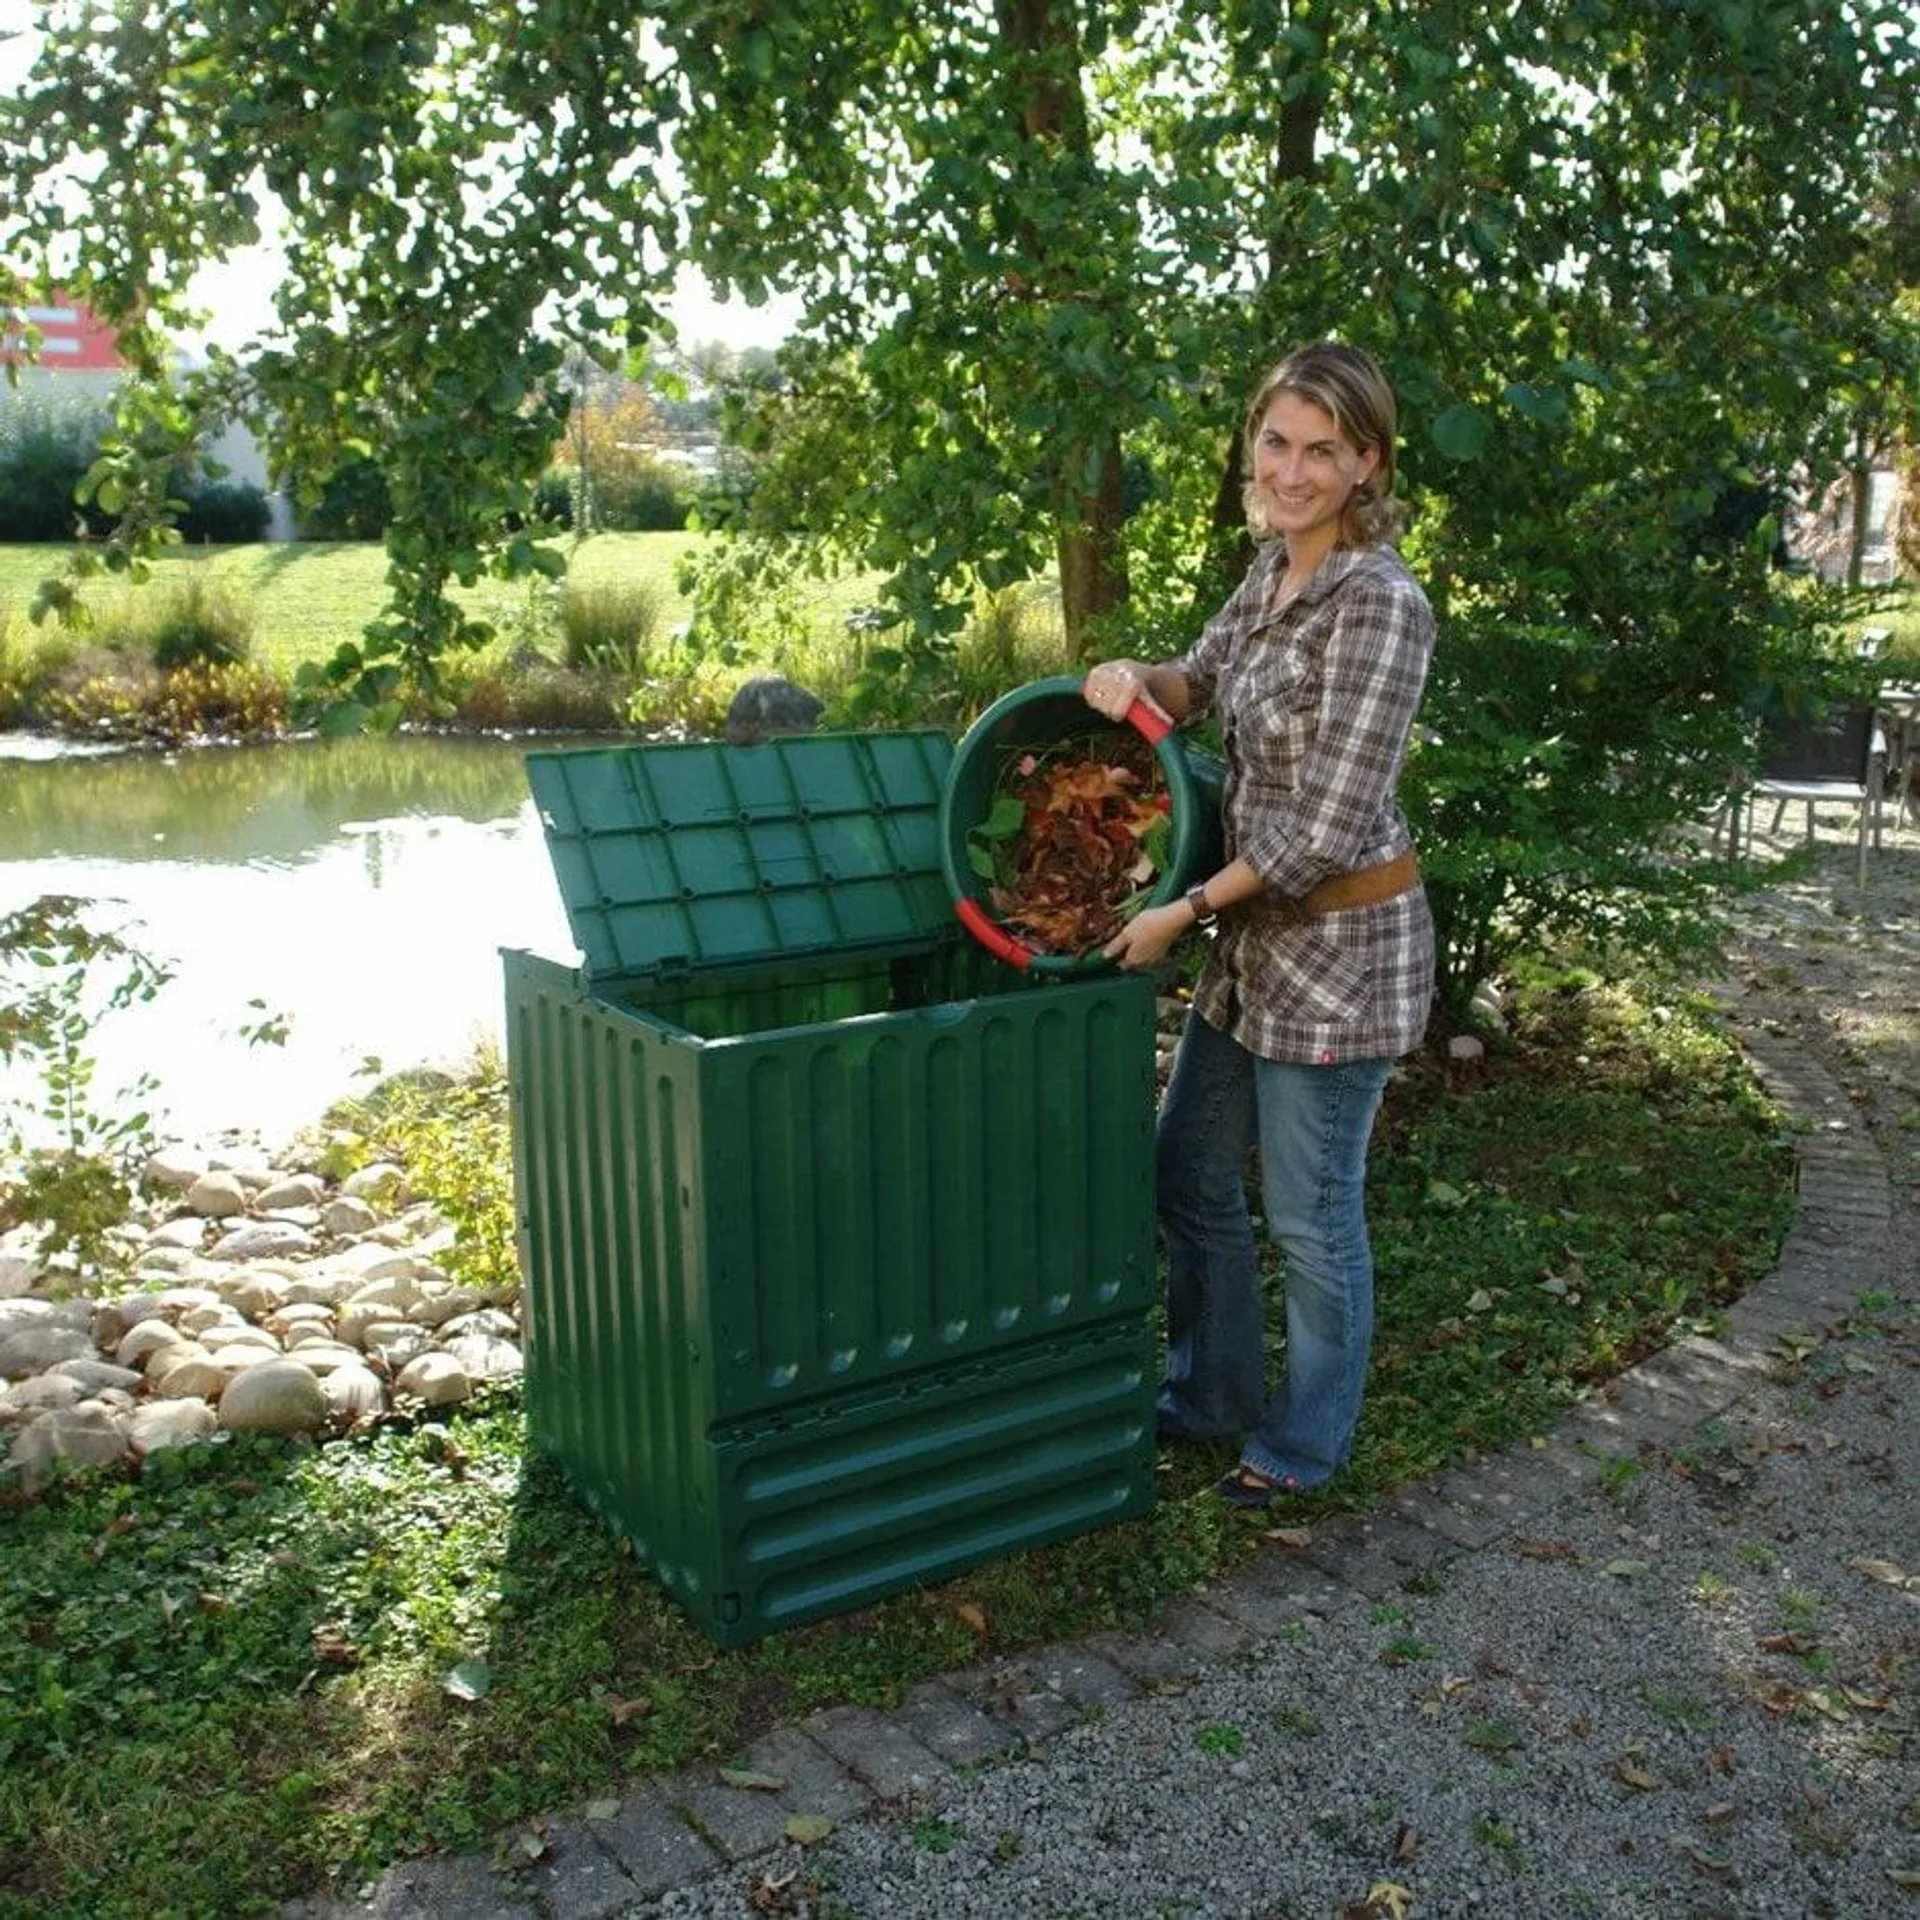 ECO-KING composter green - two sizes